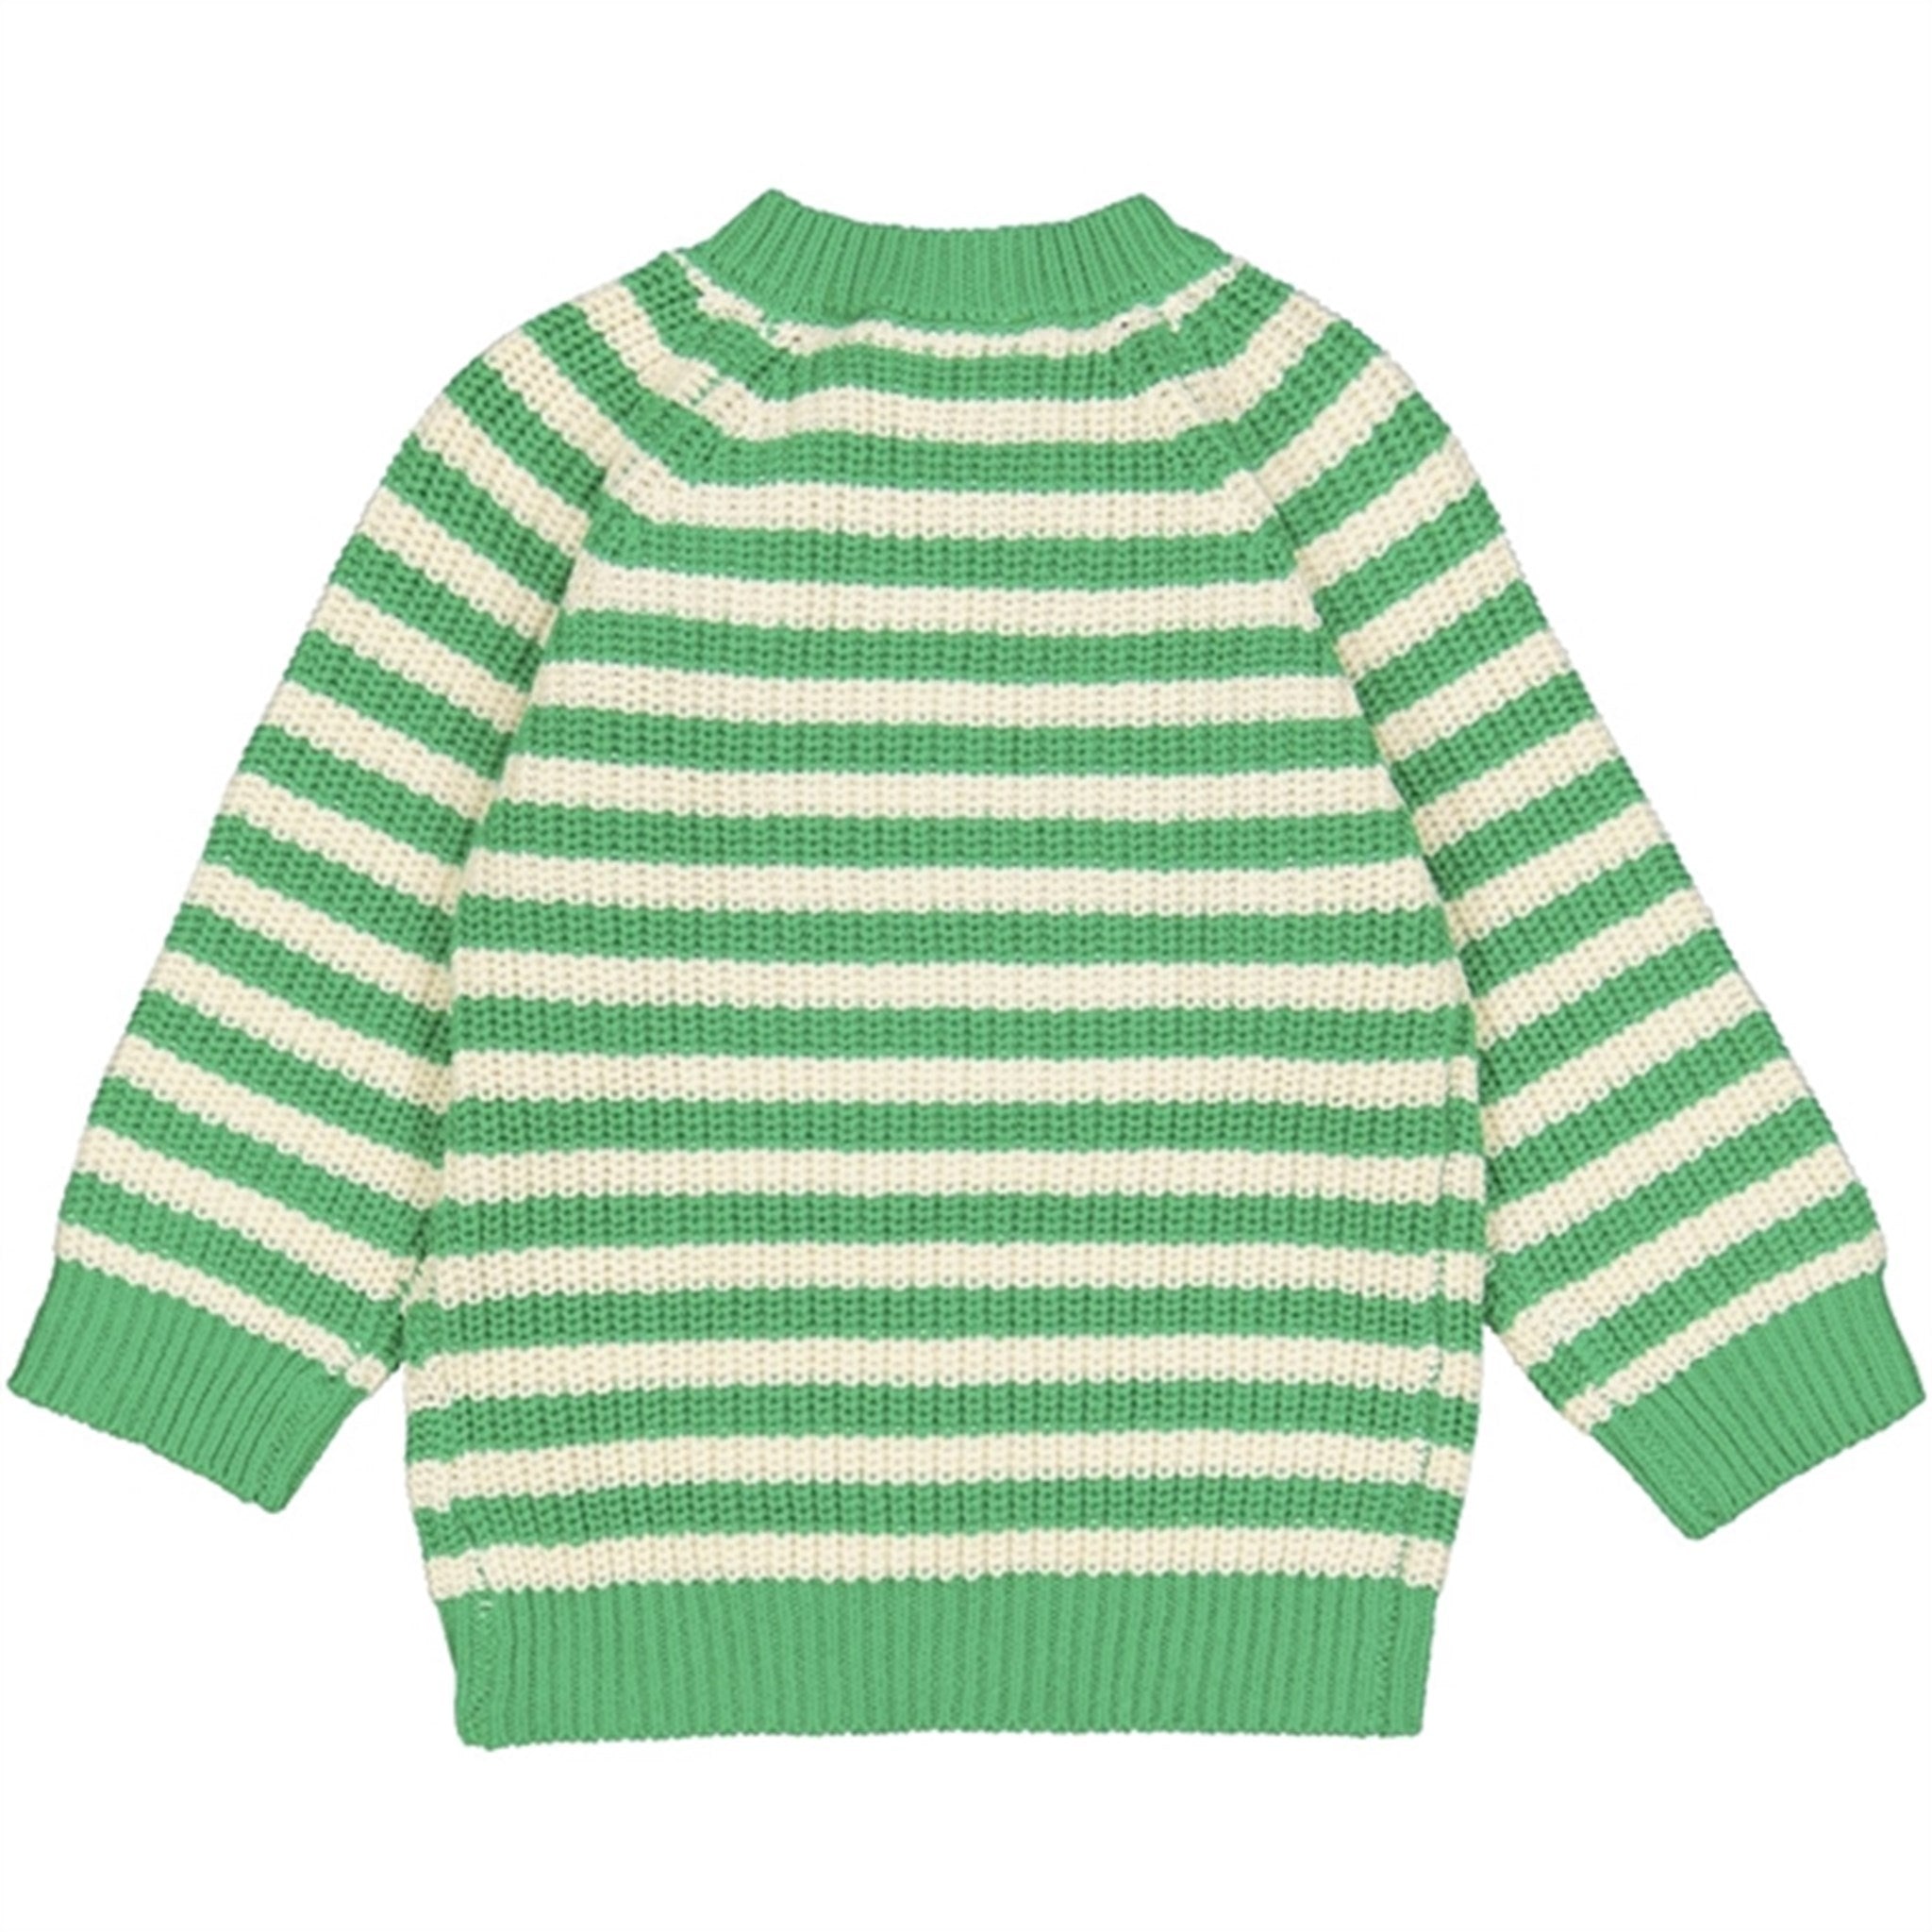 THE NEW Siblings Bright Green Ilfred Strikk Sweater 5